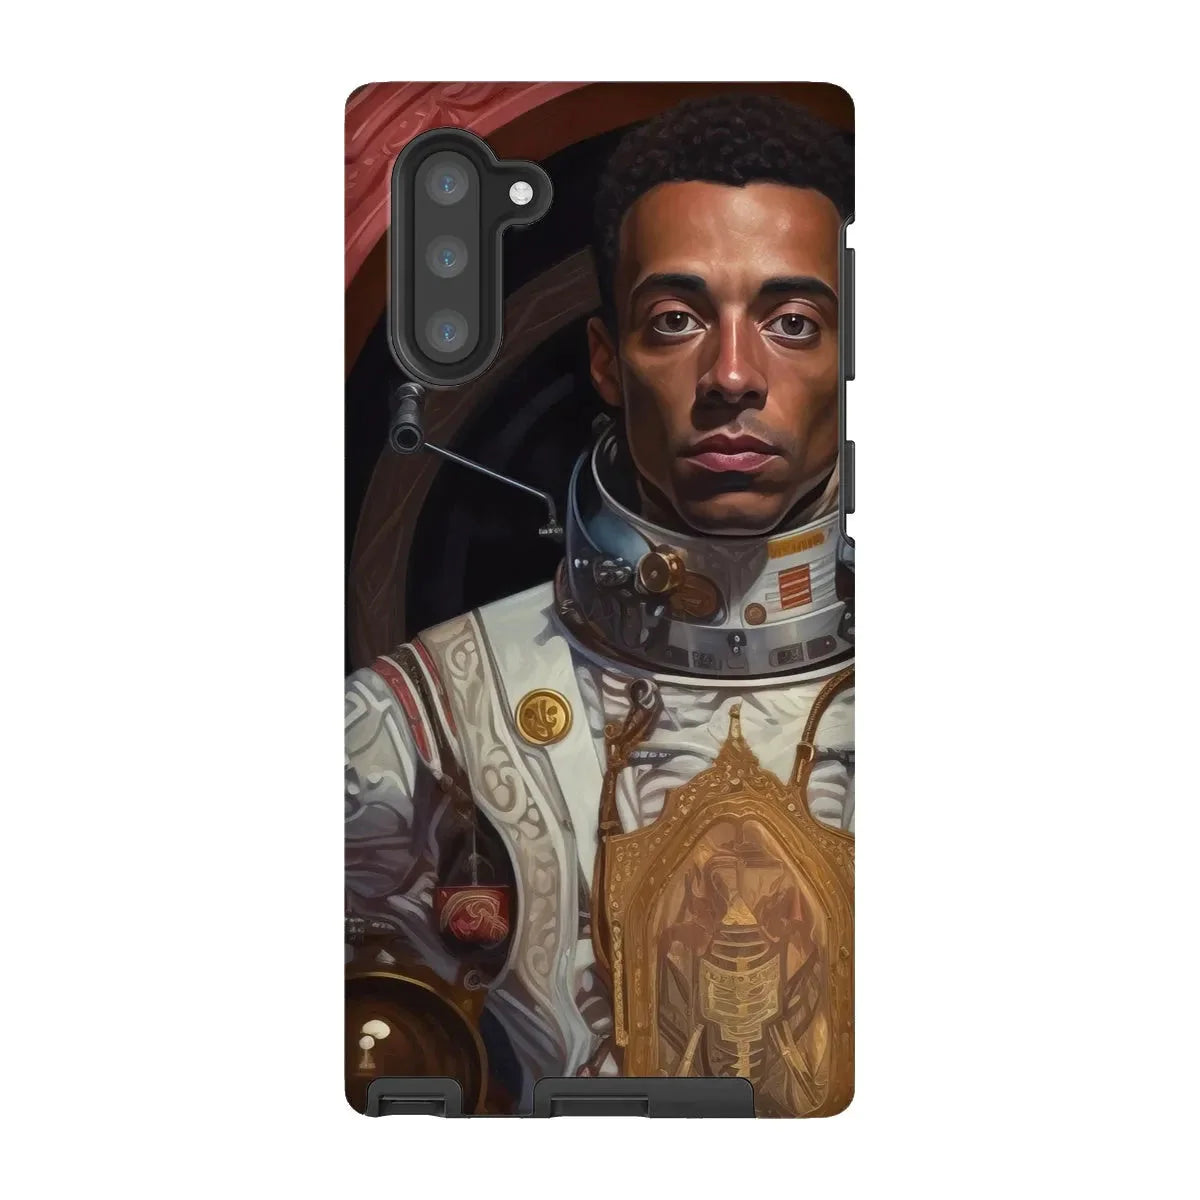 Amari The Gay Astronaut - Gay Aesthetic Art Phone Case - Samsung Galaxy Note 10 / Matte - Mobile Phone Cases